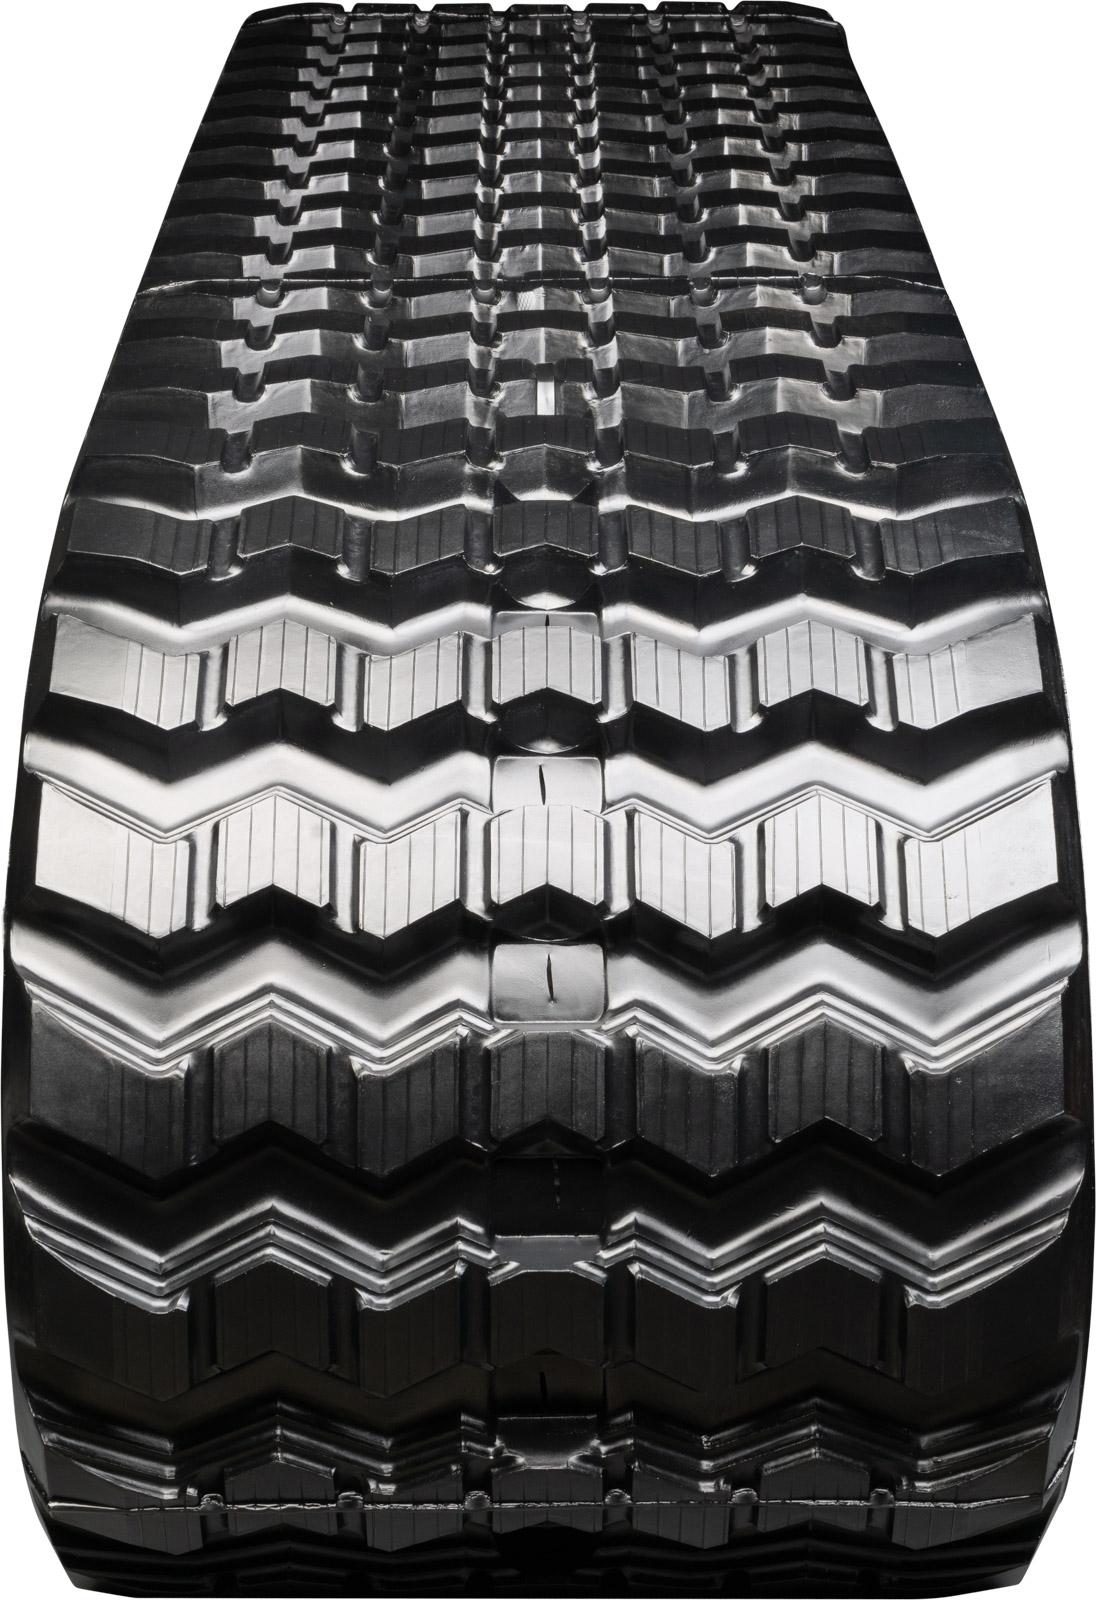 set of 2 18" camso heavy duty sawtooth pattern rubber track (450x86bx58)